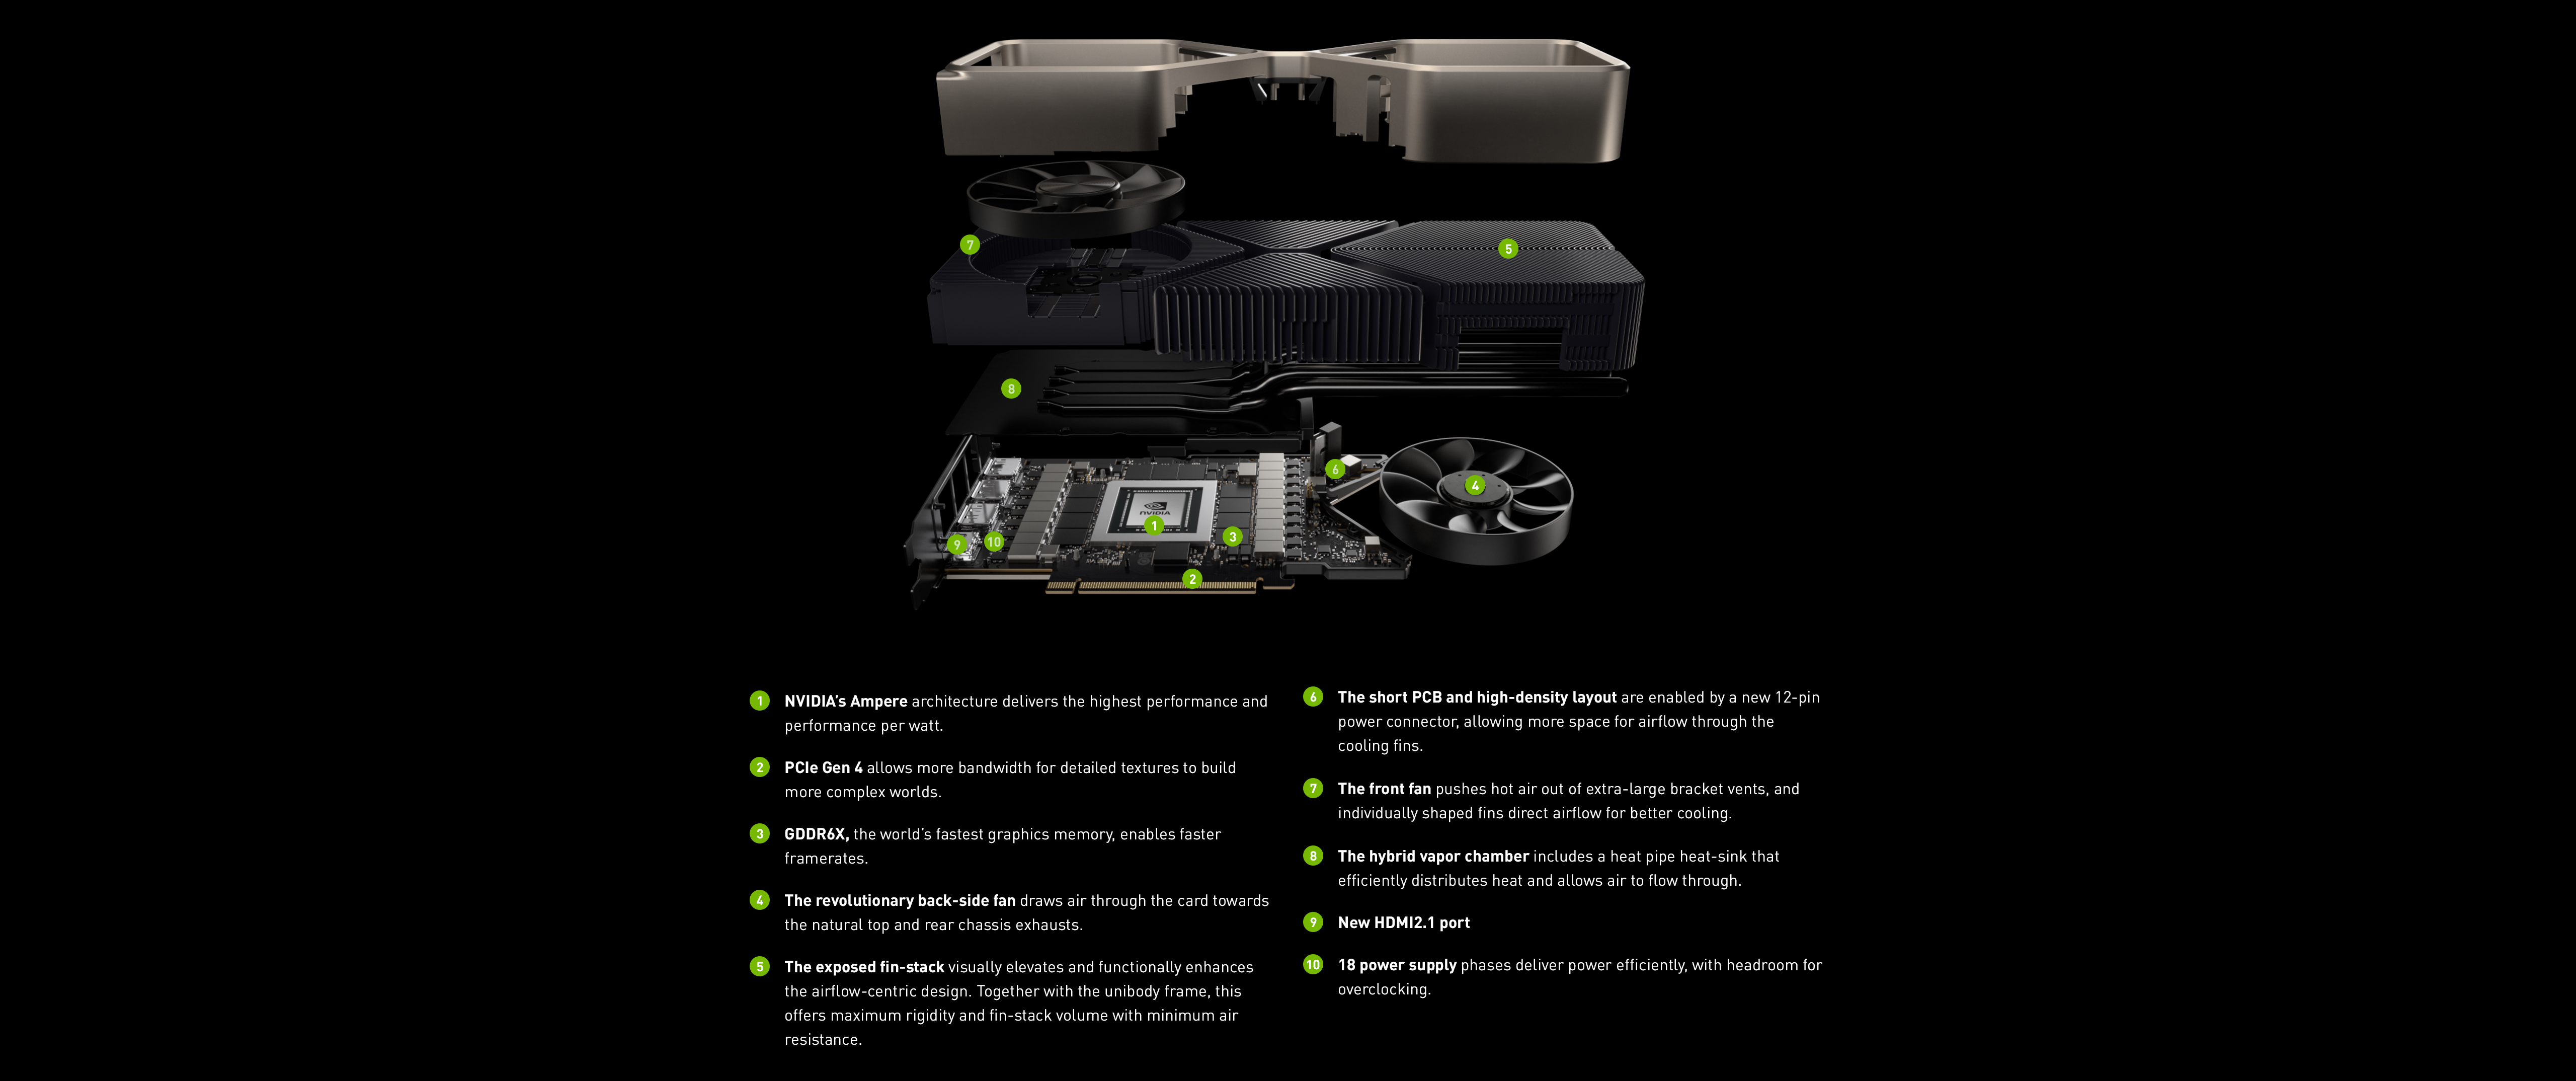 First third-party benchmarks for the NVIDIA GeForce RTX3080, is 30